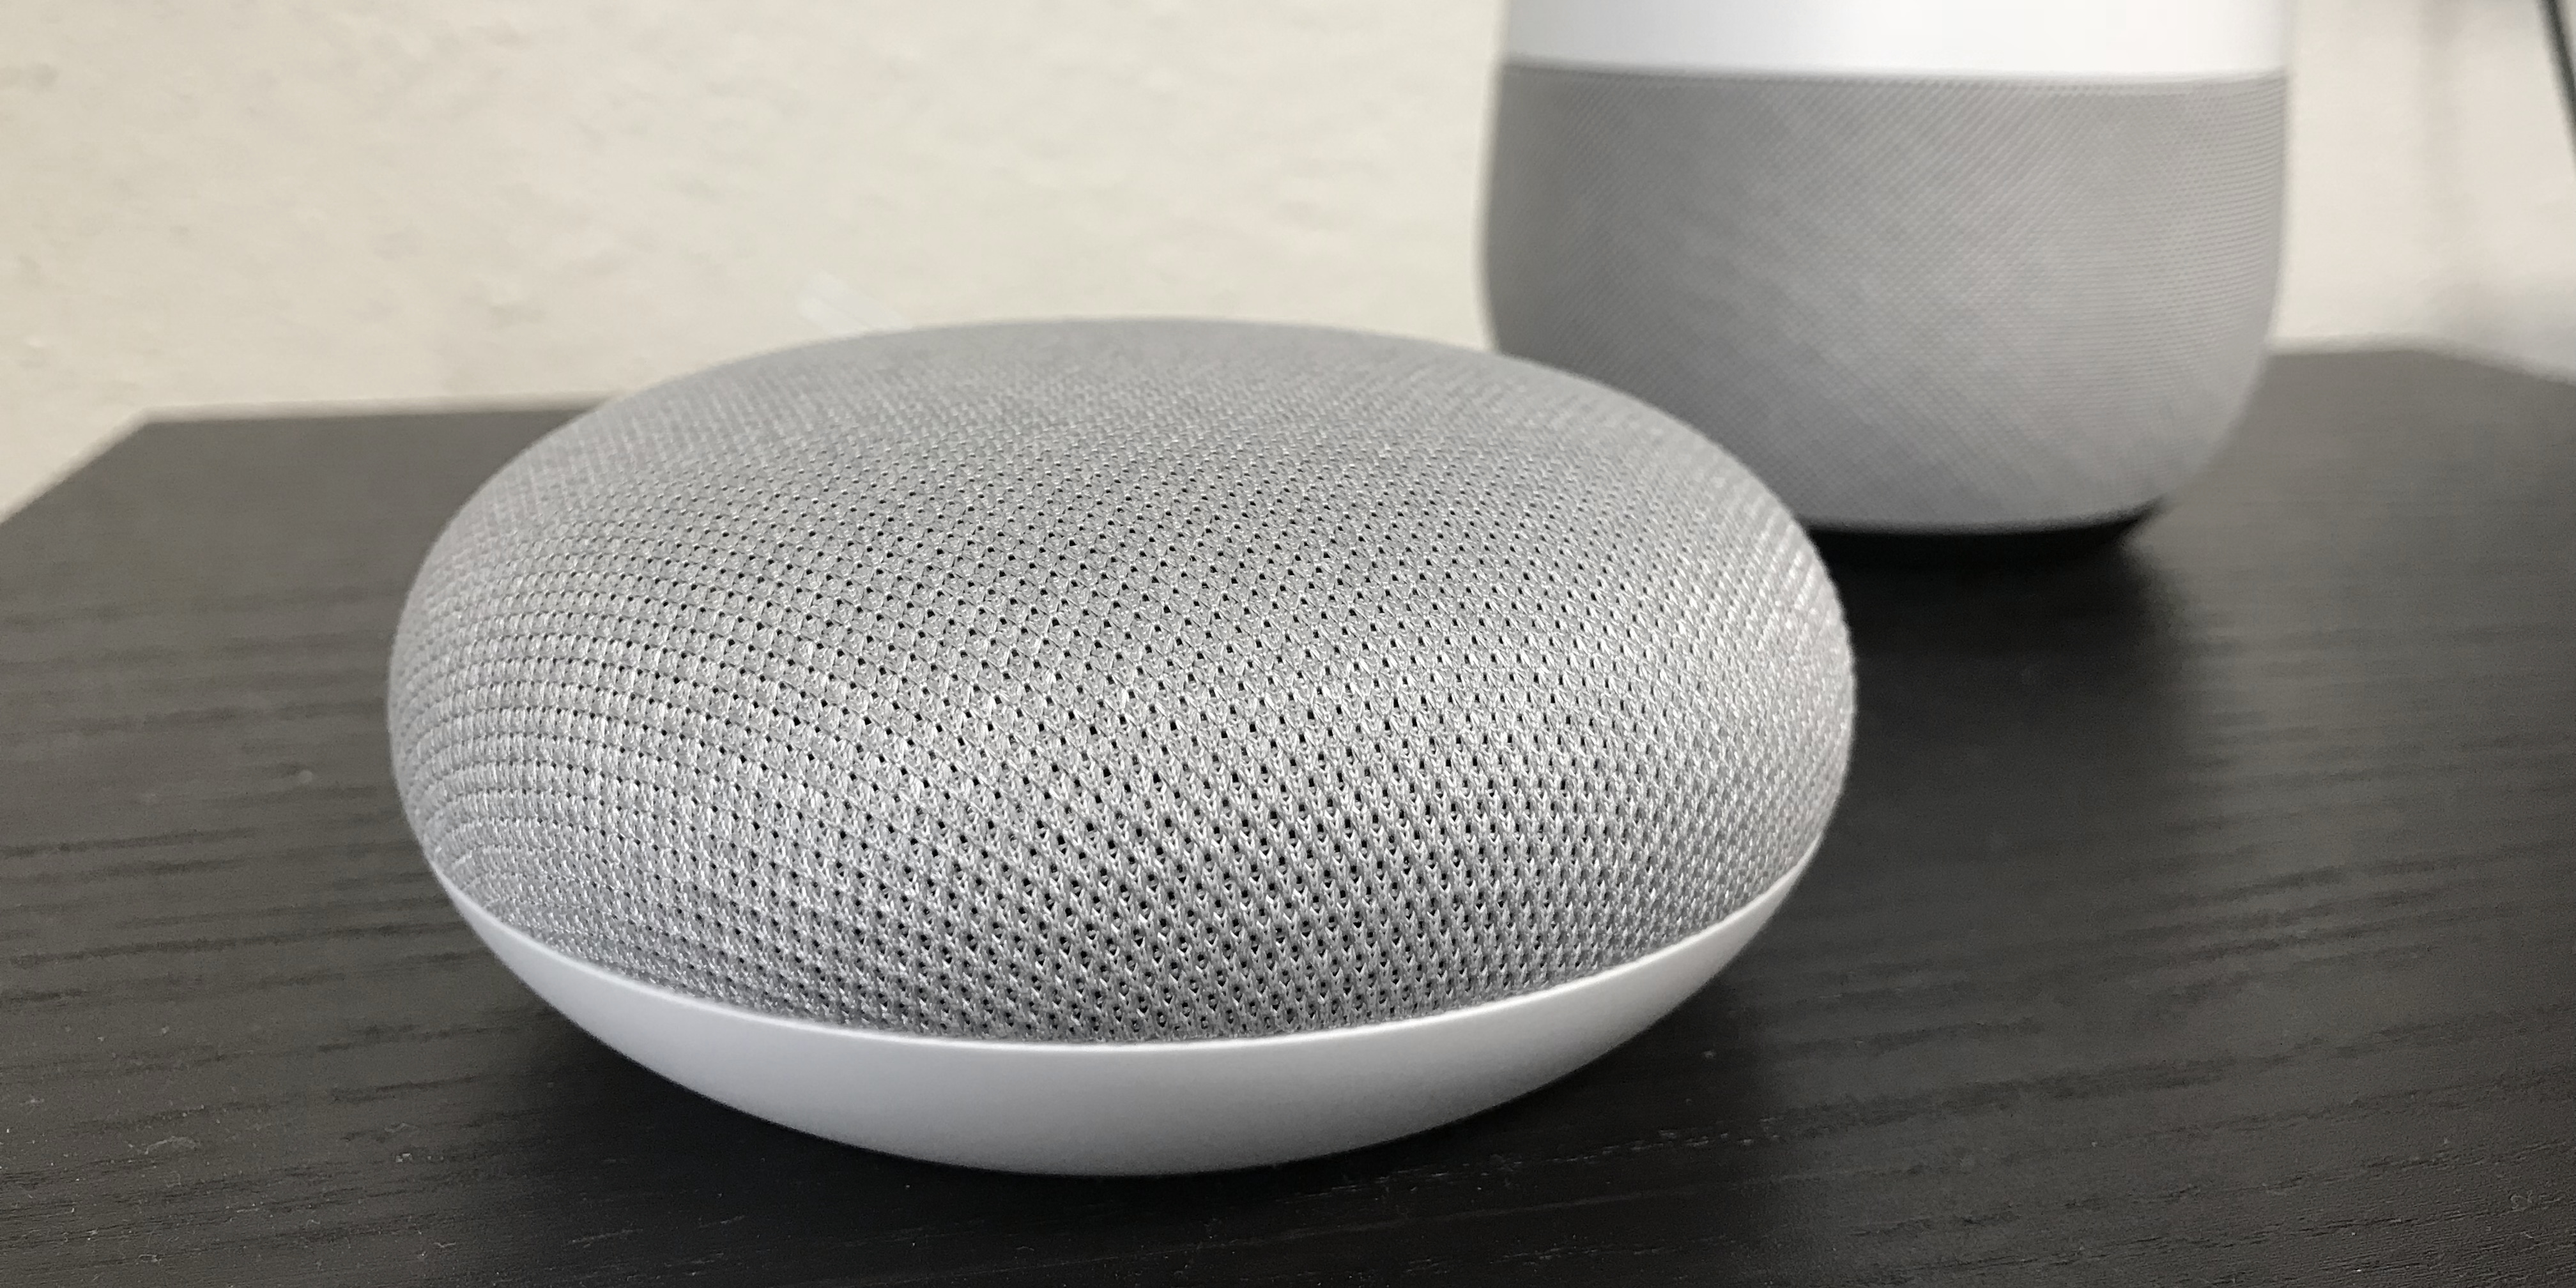 how to set up xbox to google home